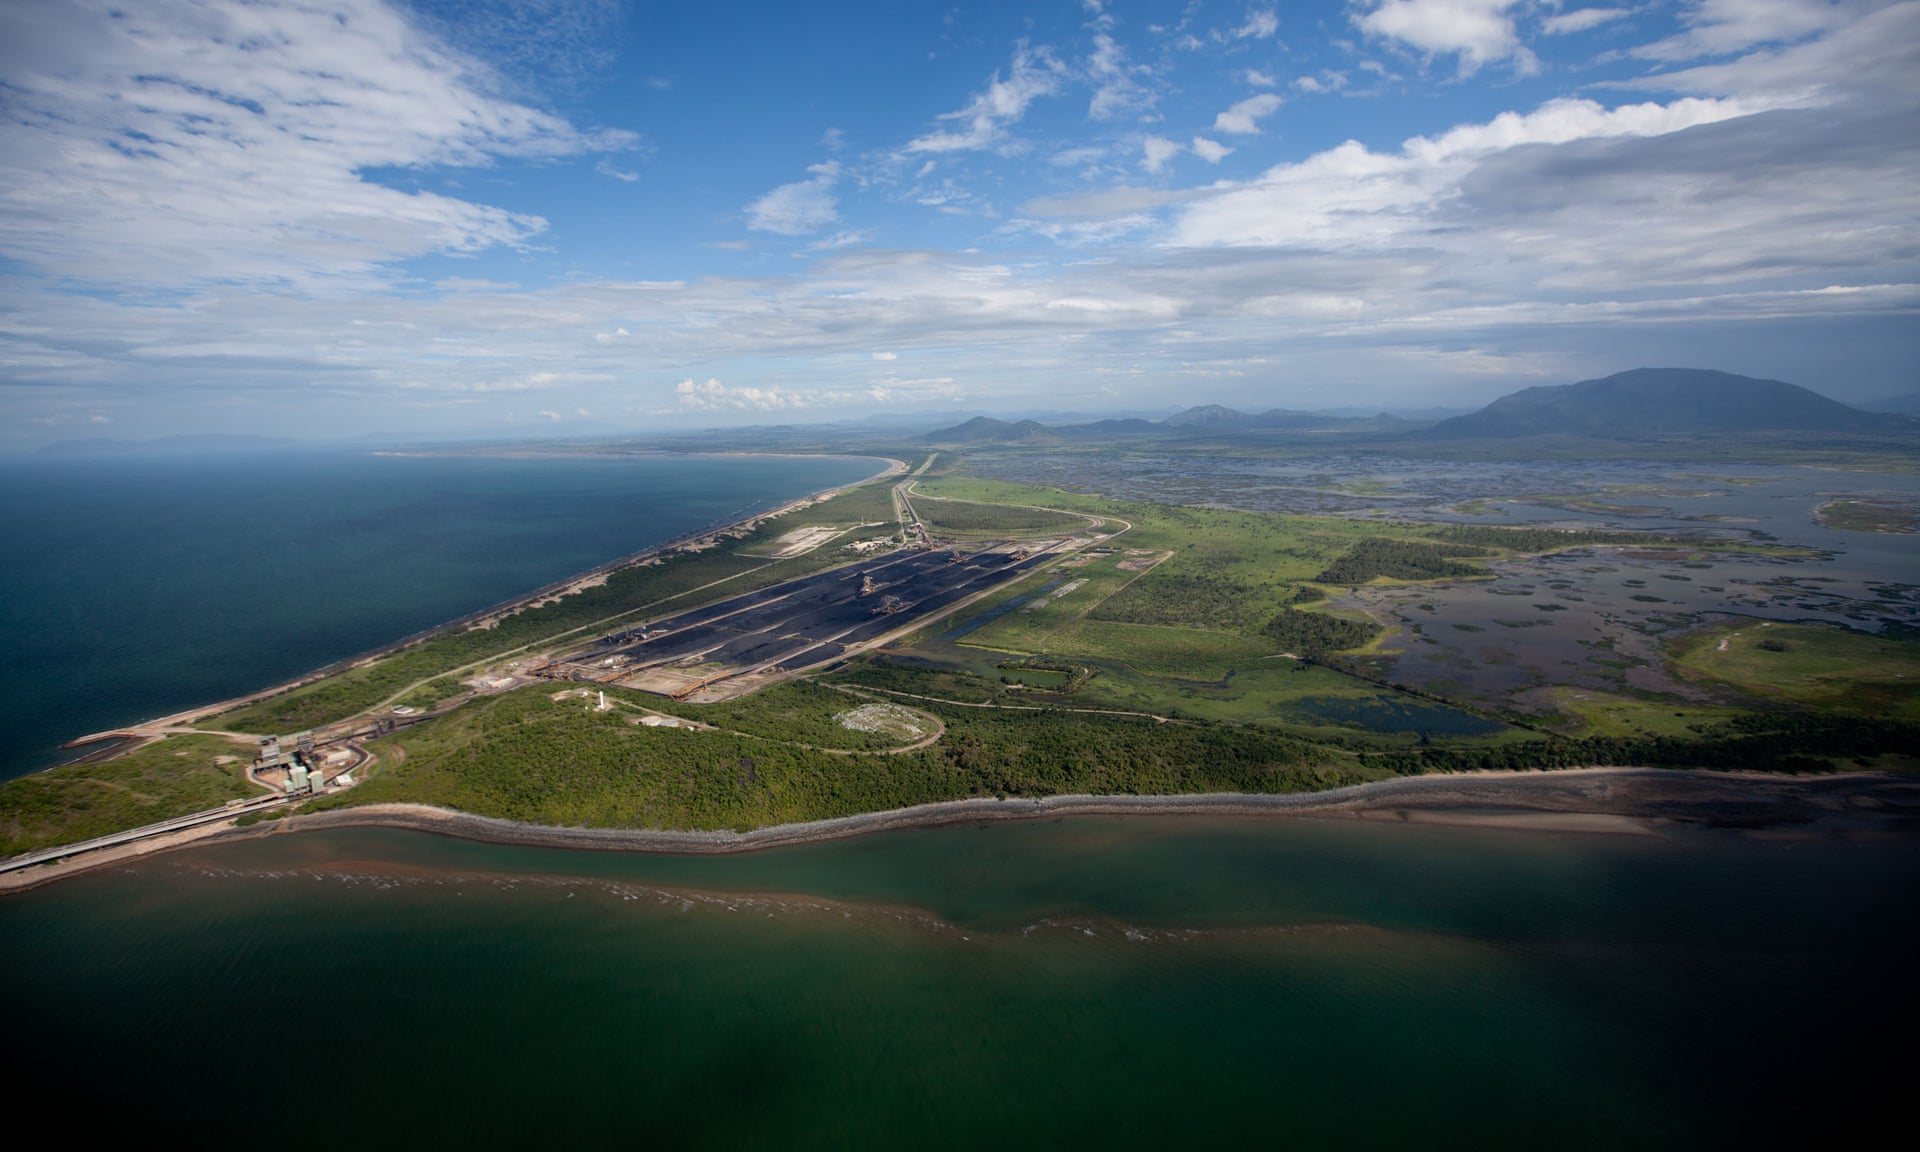 Aerial view of the Abbot Point coal port run by Adani Group. A report on 29 August 2019 by IEEFA Australia has found the Adani Carmichael coal project is “unviable” without $4.4 billion in taxpayer-funded subsidies. Photo: Greenpeace